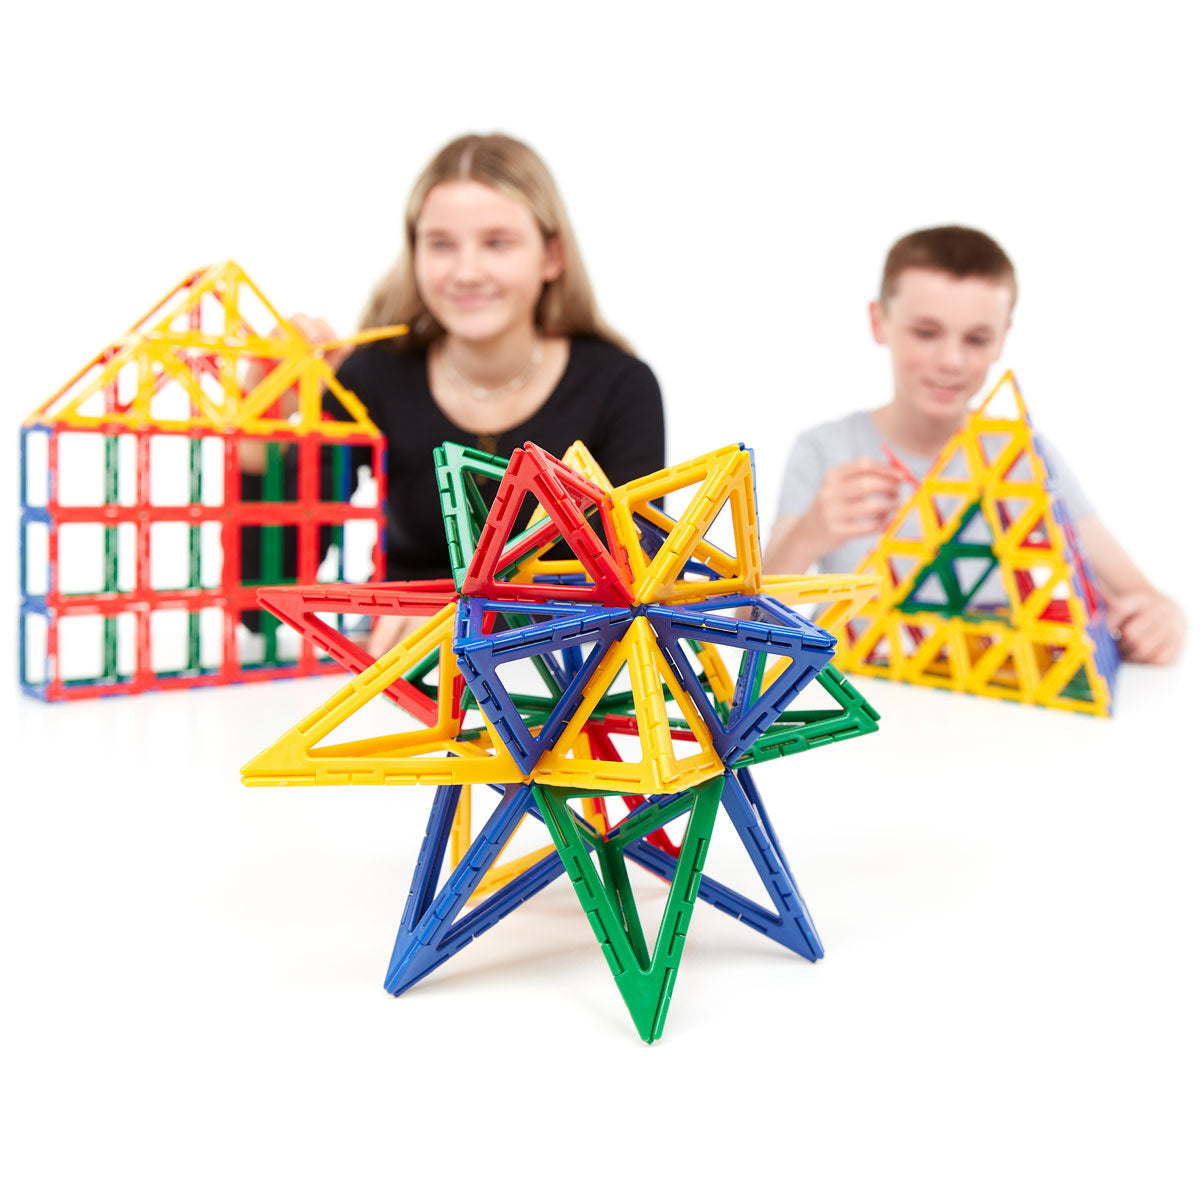 Polydron Frameworks Multi Pack 460 Pieces, Unleash your creativity and explore the world of structures and geometric solids with the Polydron Frameworks Multi Pack 460 Pieces. This massive set offers endless possibilities for construction and discovery, making it a must-have for any learning environment.The set contains a whopping 460 pieces in total, providing a wide range of shapes to work with. Included in the set are 20 hexagons, 80 squares, 160 equilateral triangles, 40 pentagons, 80 right angle triang